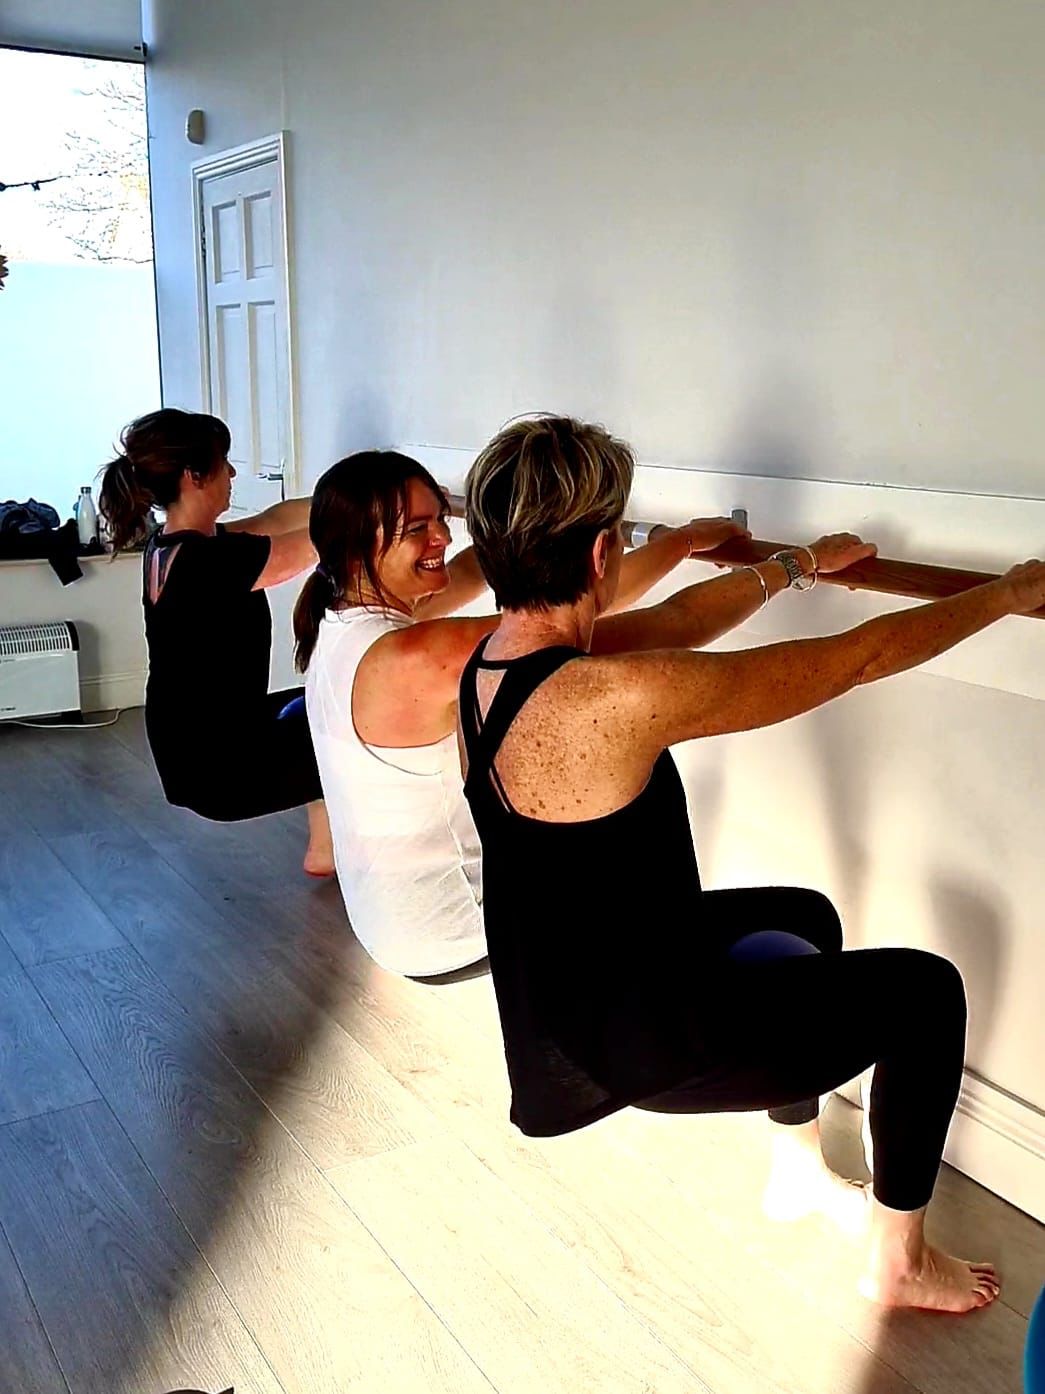 About Us - The Yoga Barre